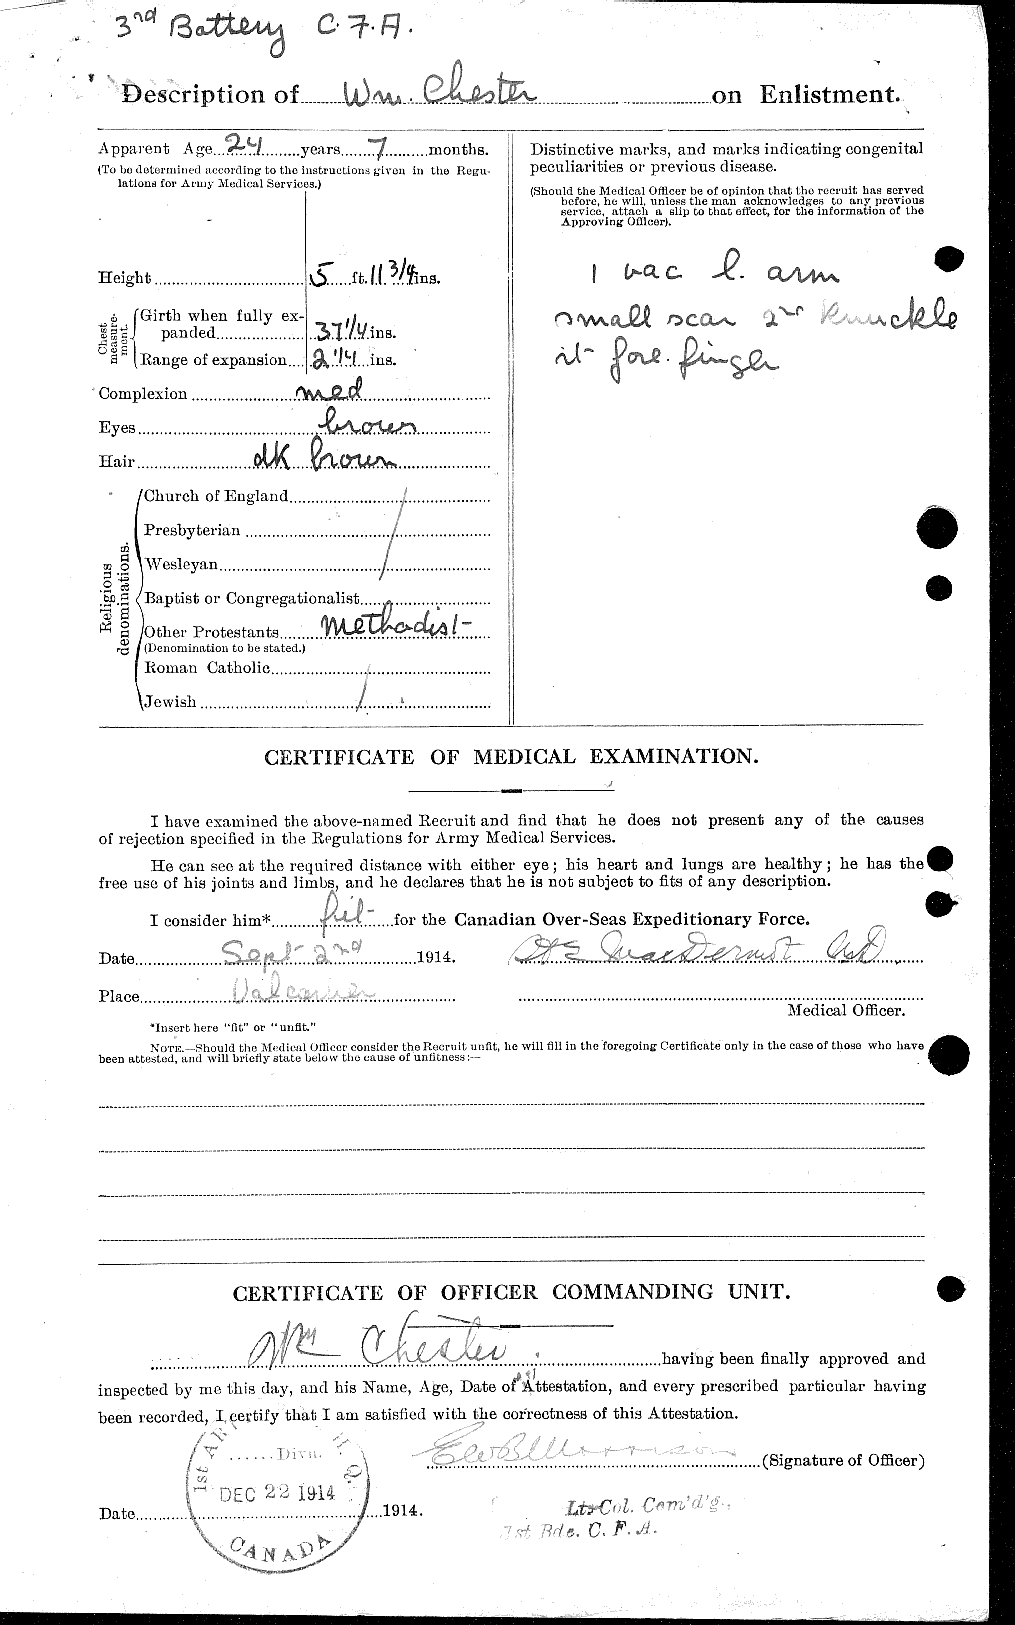 Personnel Records of the First World War - CEF 017737b